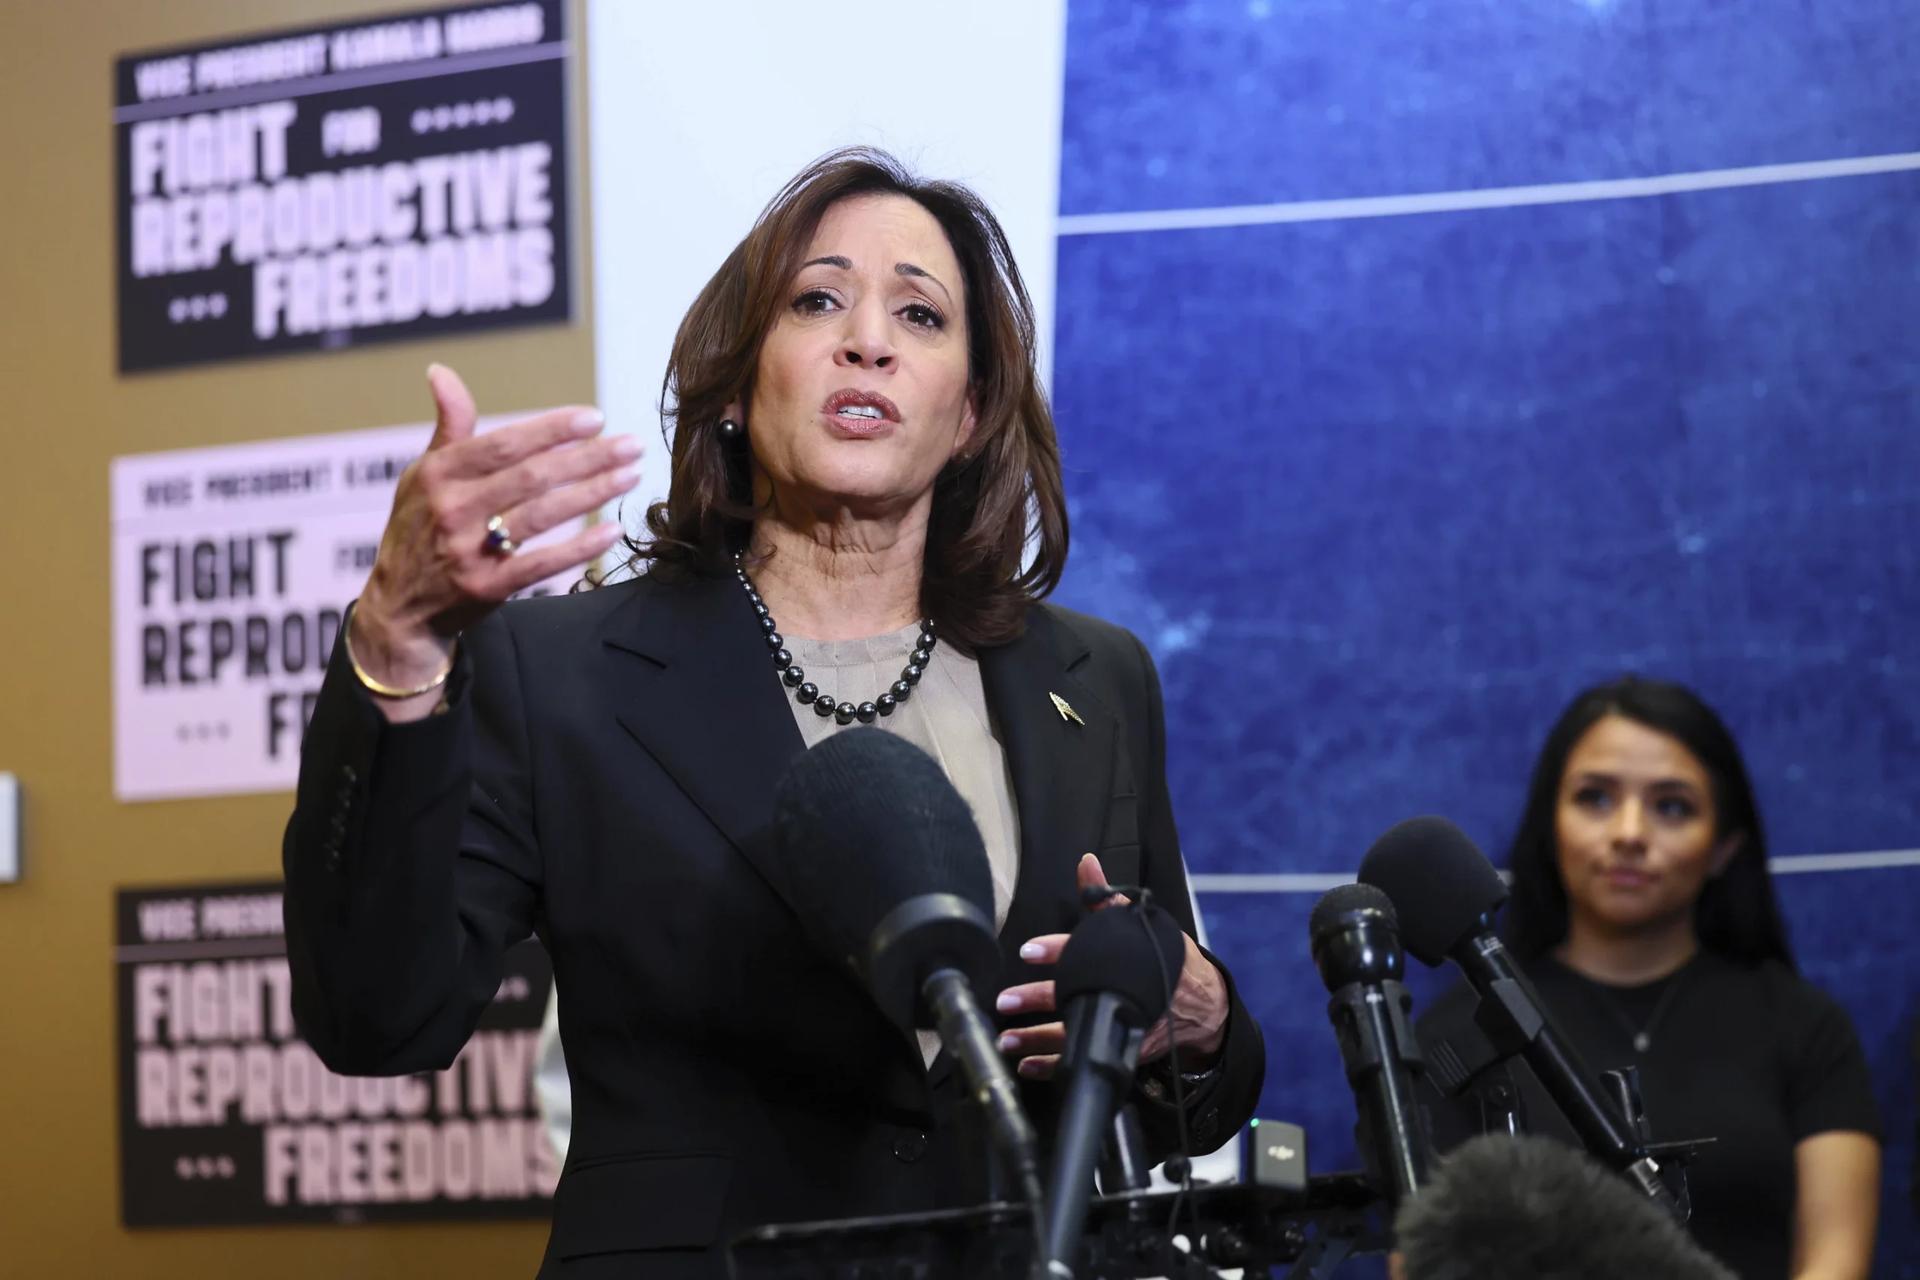 Pro-Life bishop says VP Harris should visit ‘service of life’ – not abortion clinic